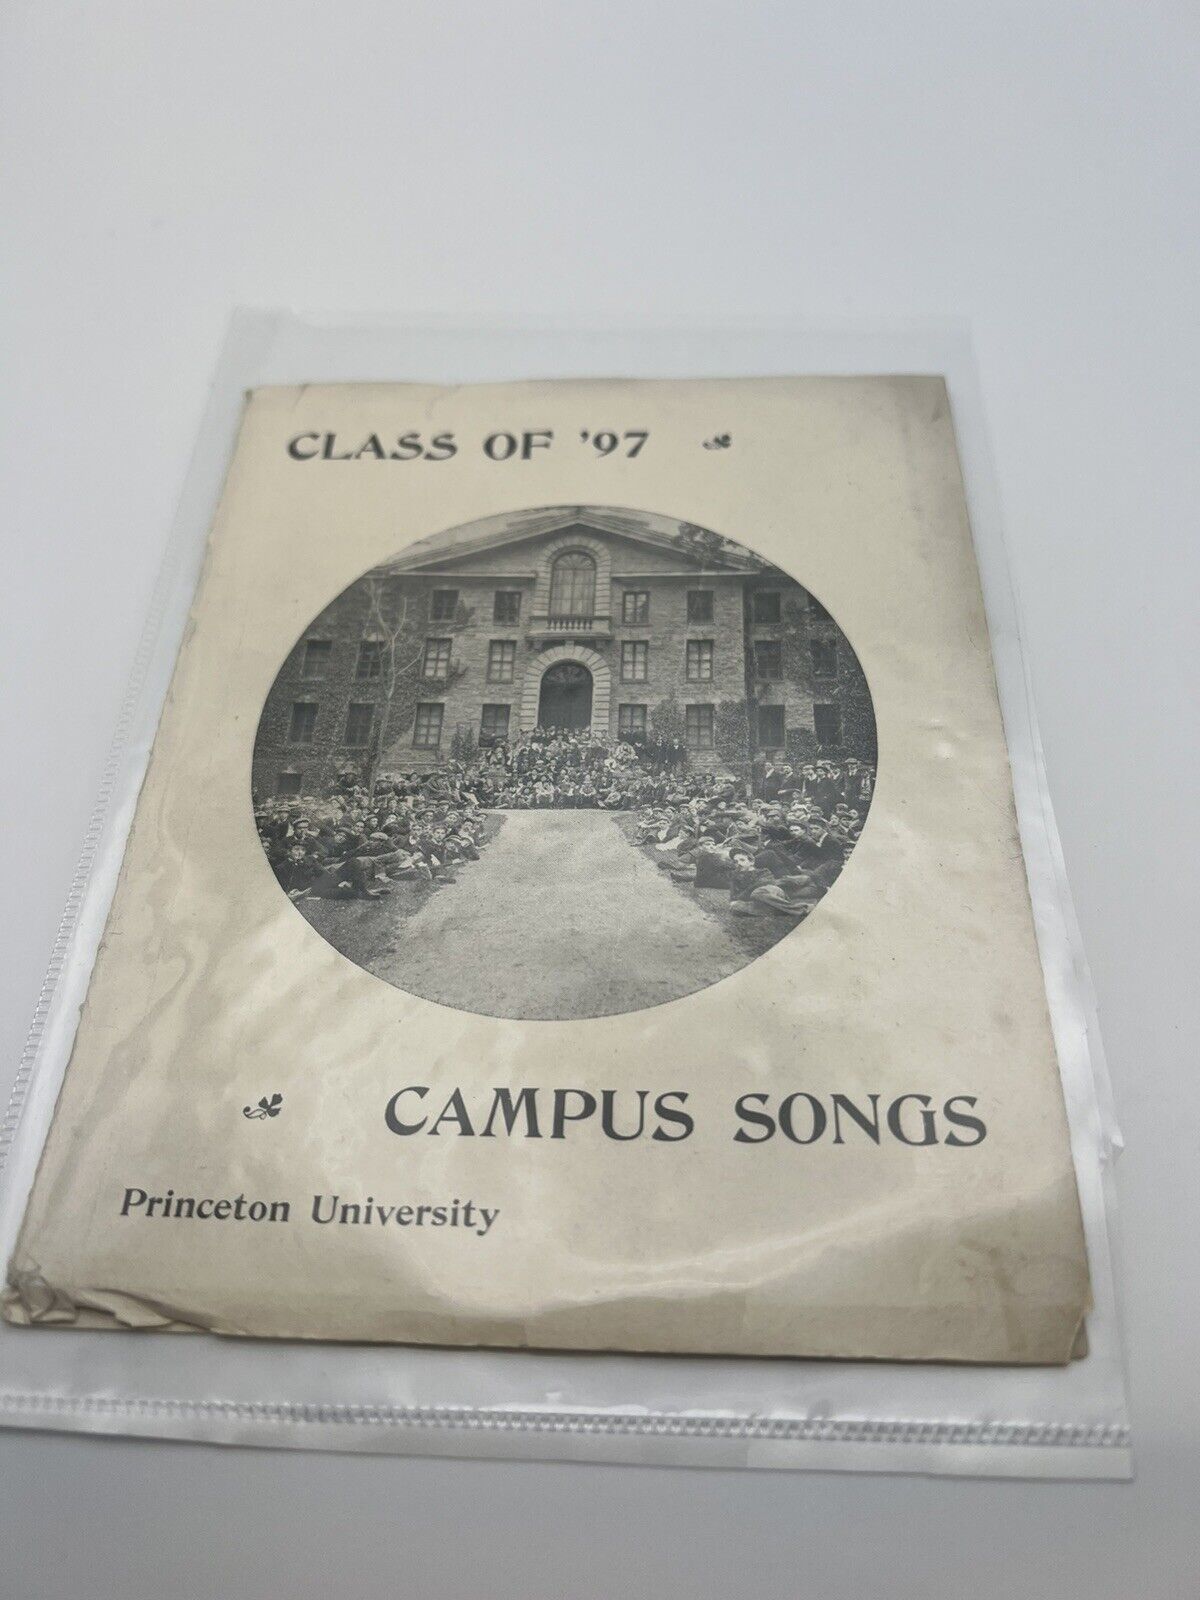 ANTIQUE CLASS OF 1897 PRINCETON UNIVERSITY CAMPUS SONGS